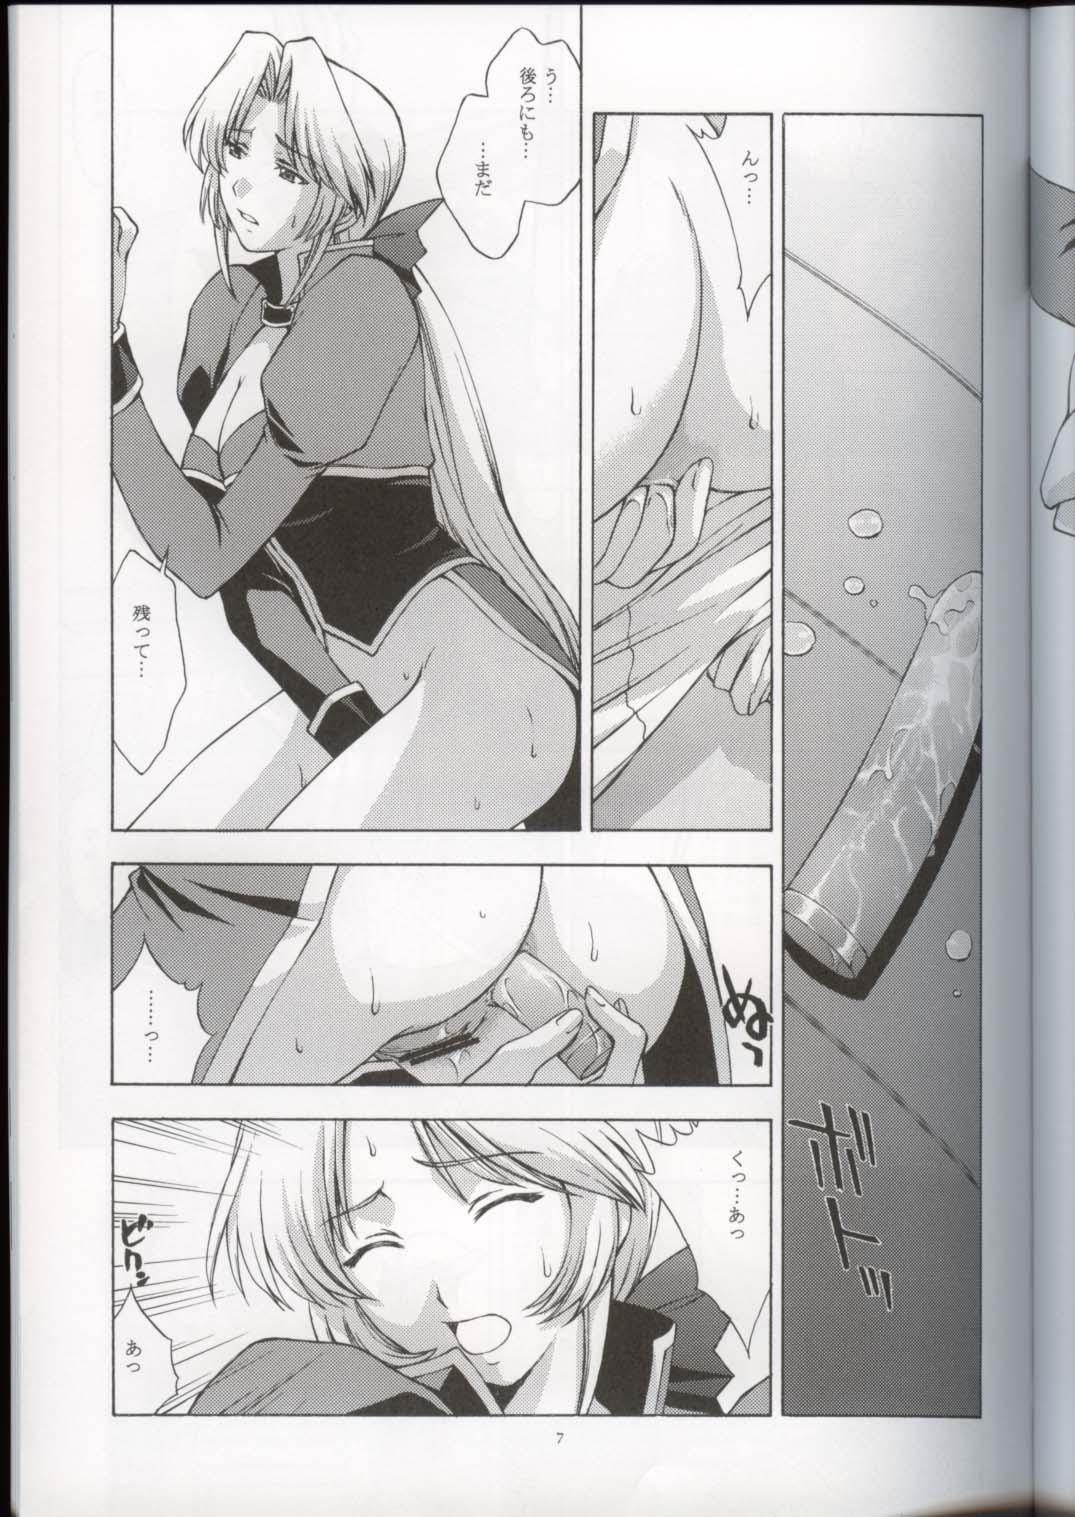 Jerking Off Utahime no Shouzou 3 - Dead or alive Youth Porn - Page 7